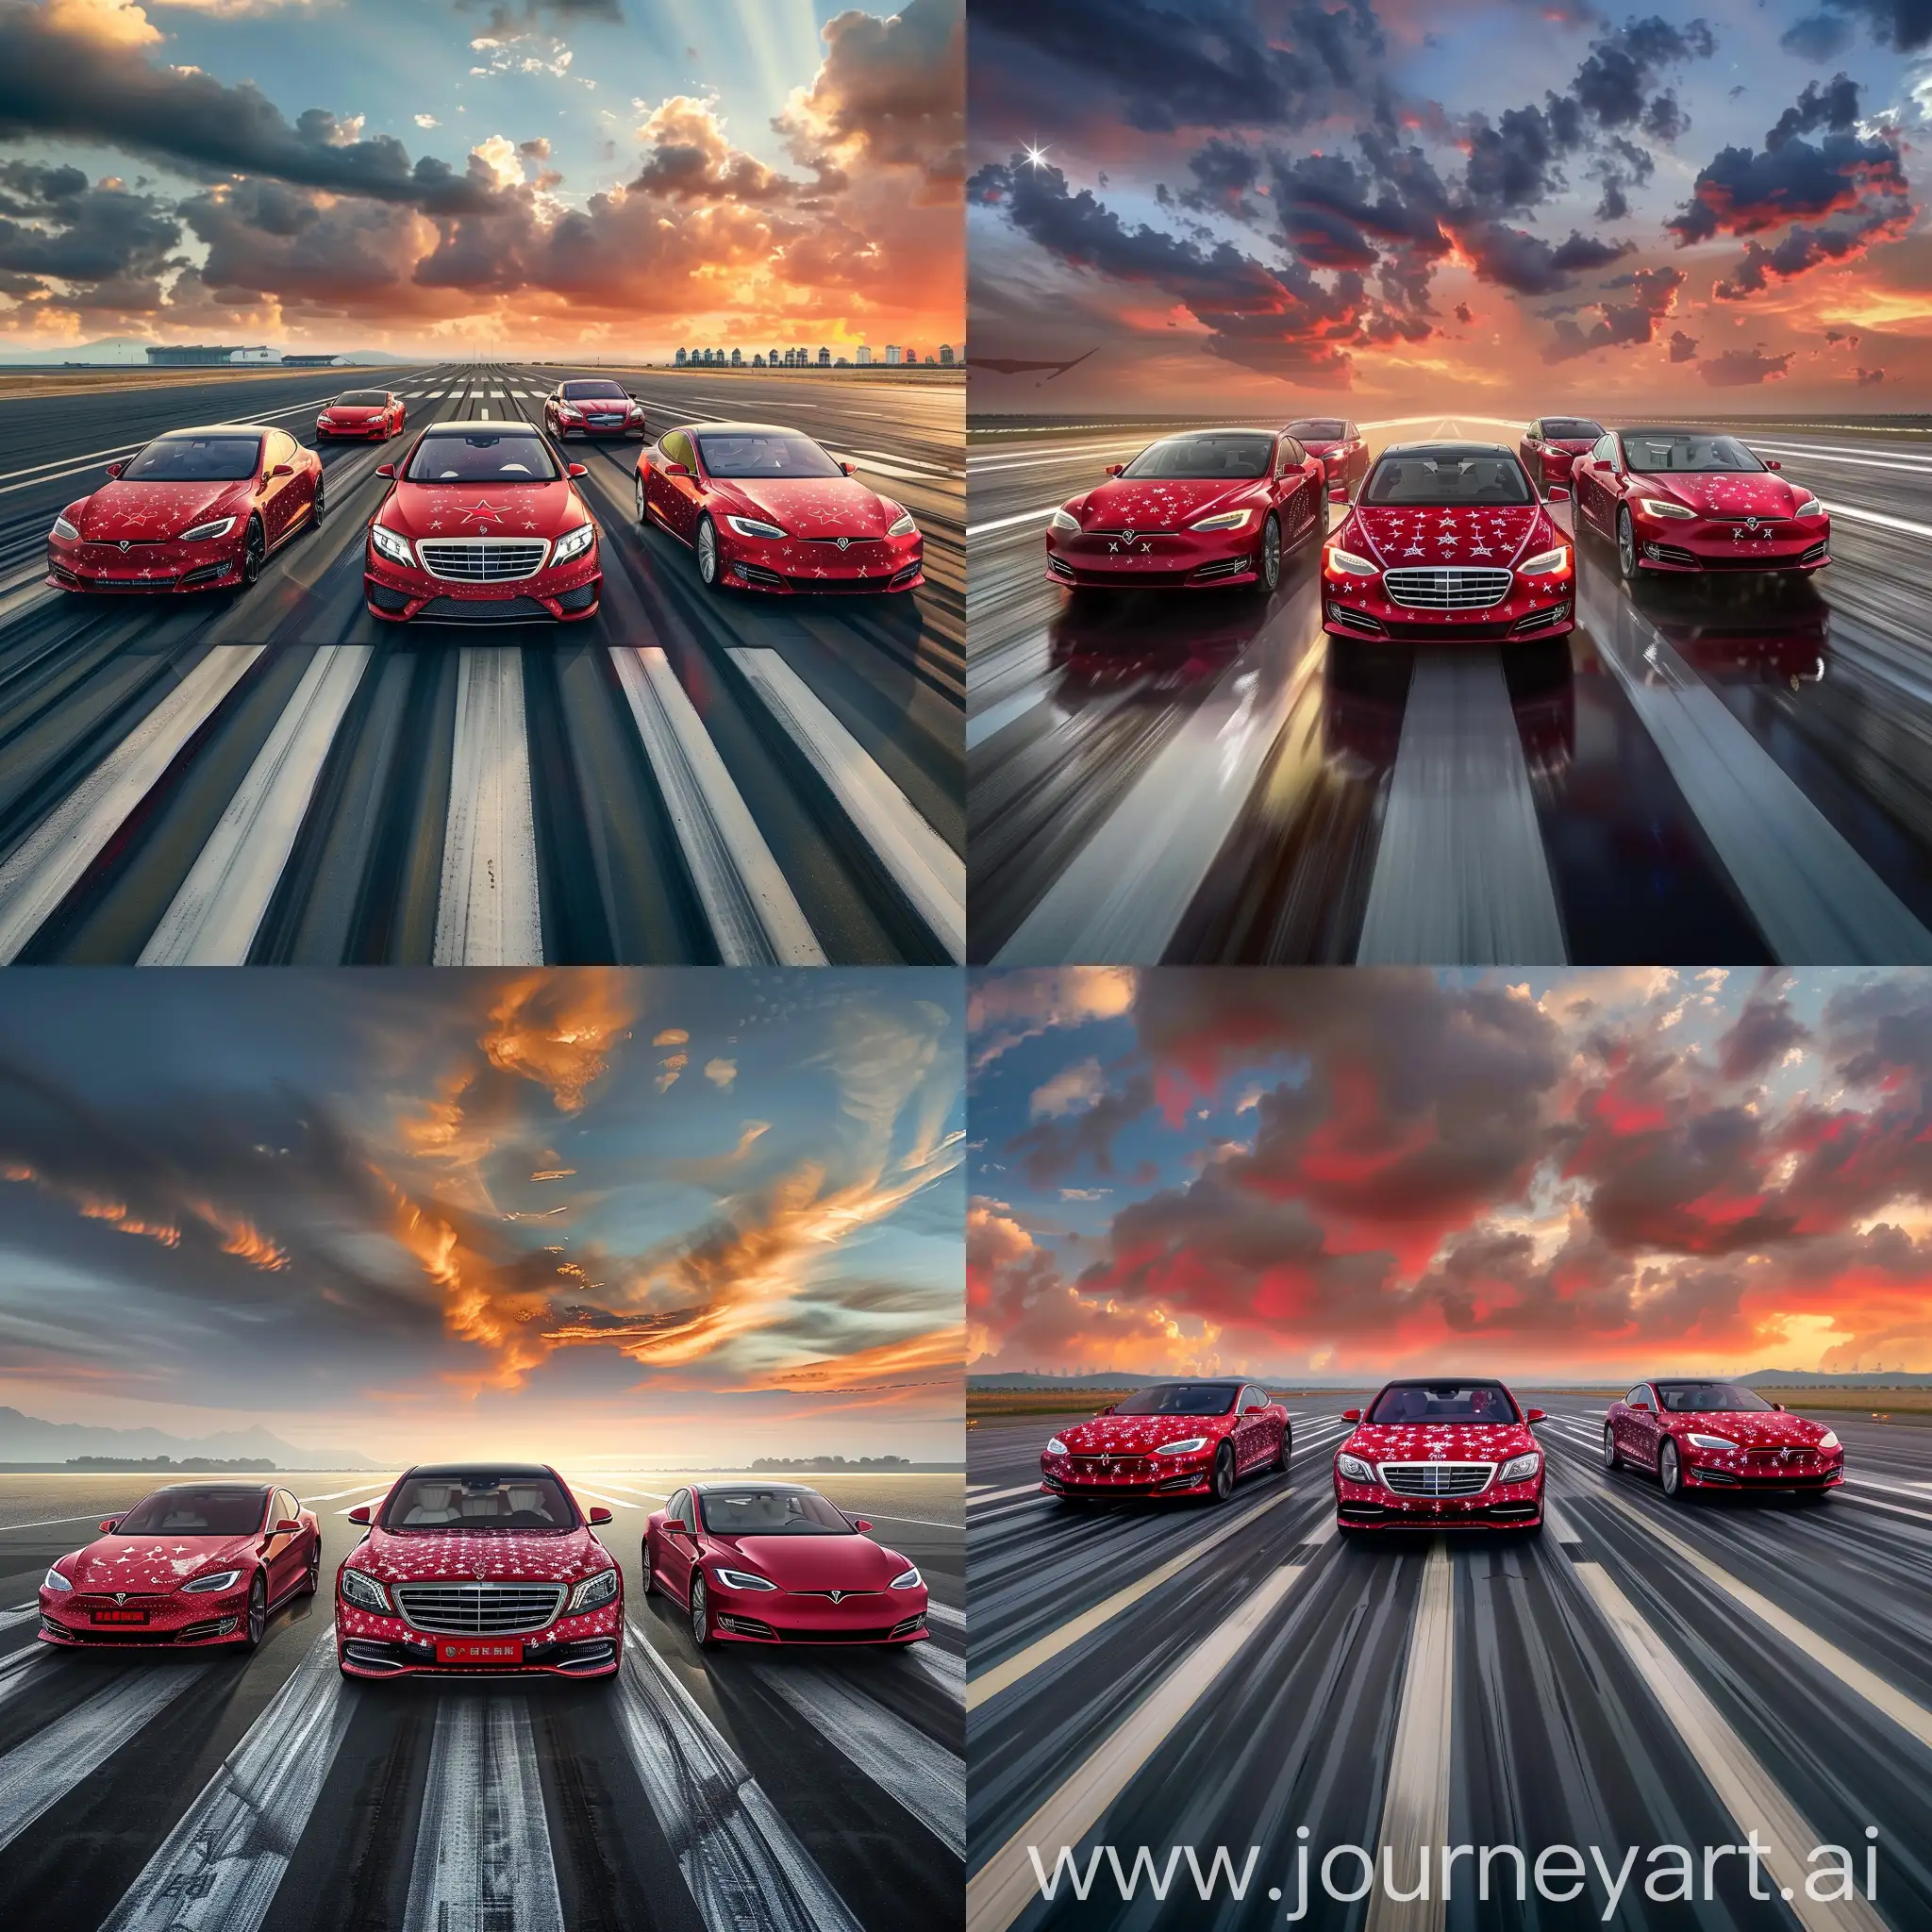 Generate an image with five luxury cars on a runway with a dramatic sky in the background. From left to right: red Mercedes S-Class with Chinese stars, red Toyota Camry with Chinese stars, Tesla, BMW and Honda. The cars should look like real cars, the image should be suitable for the header of the group in VKontakte.